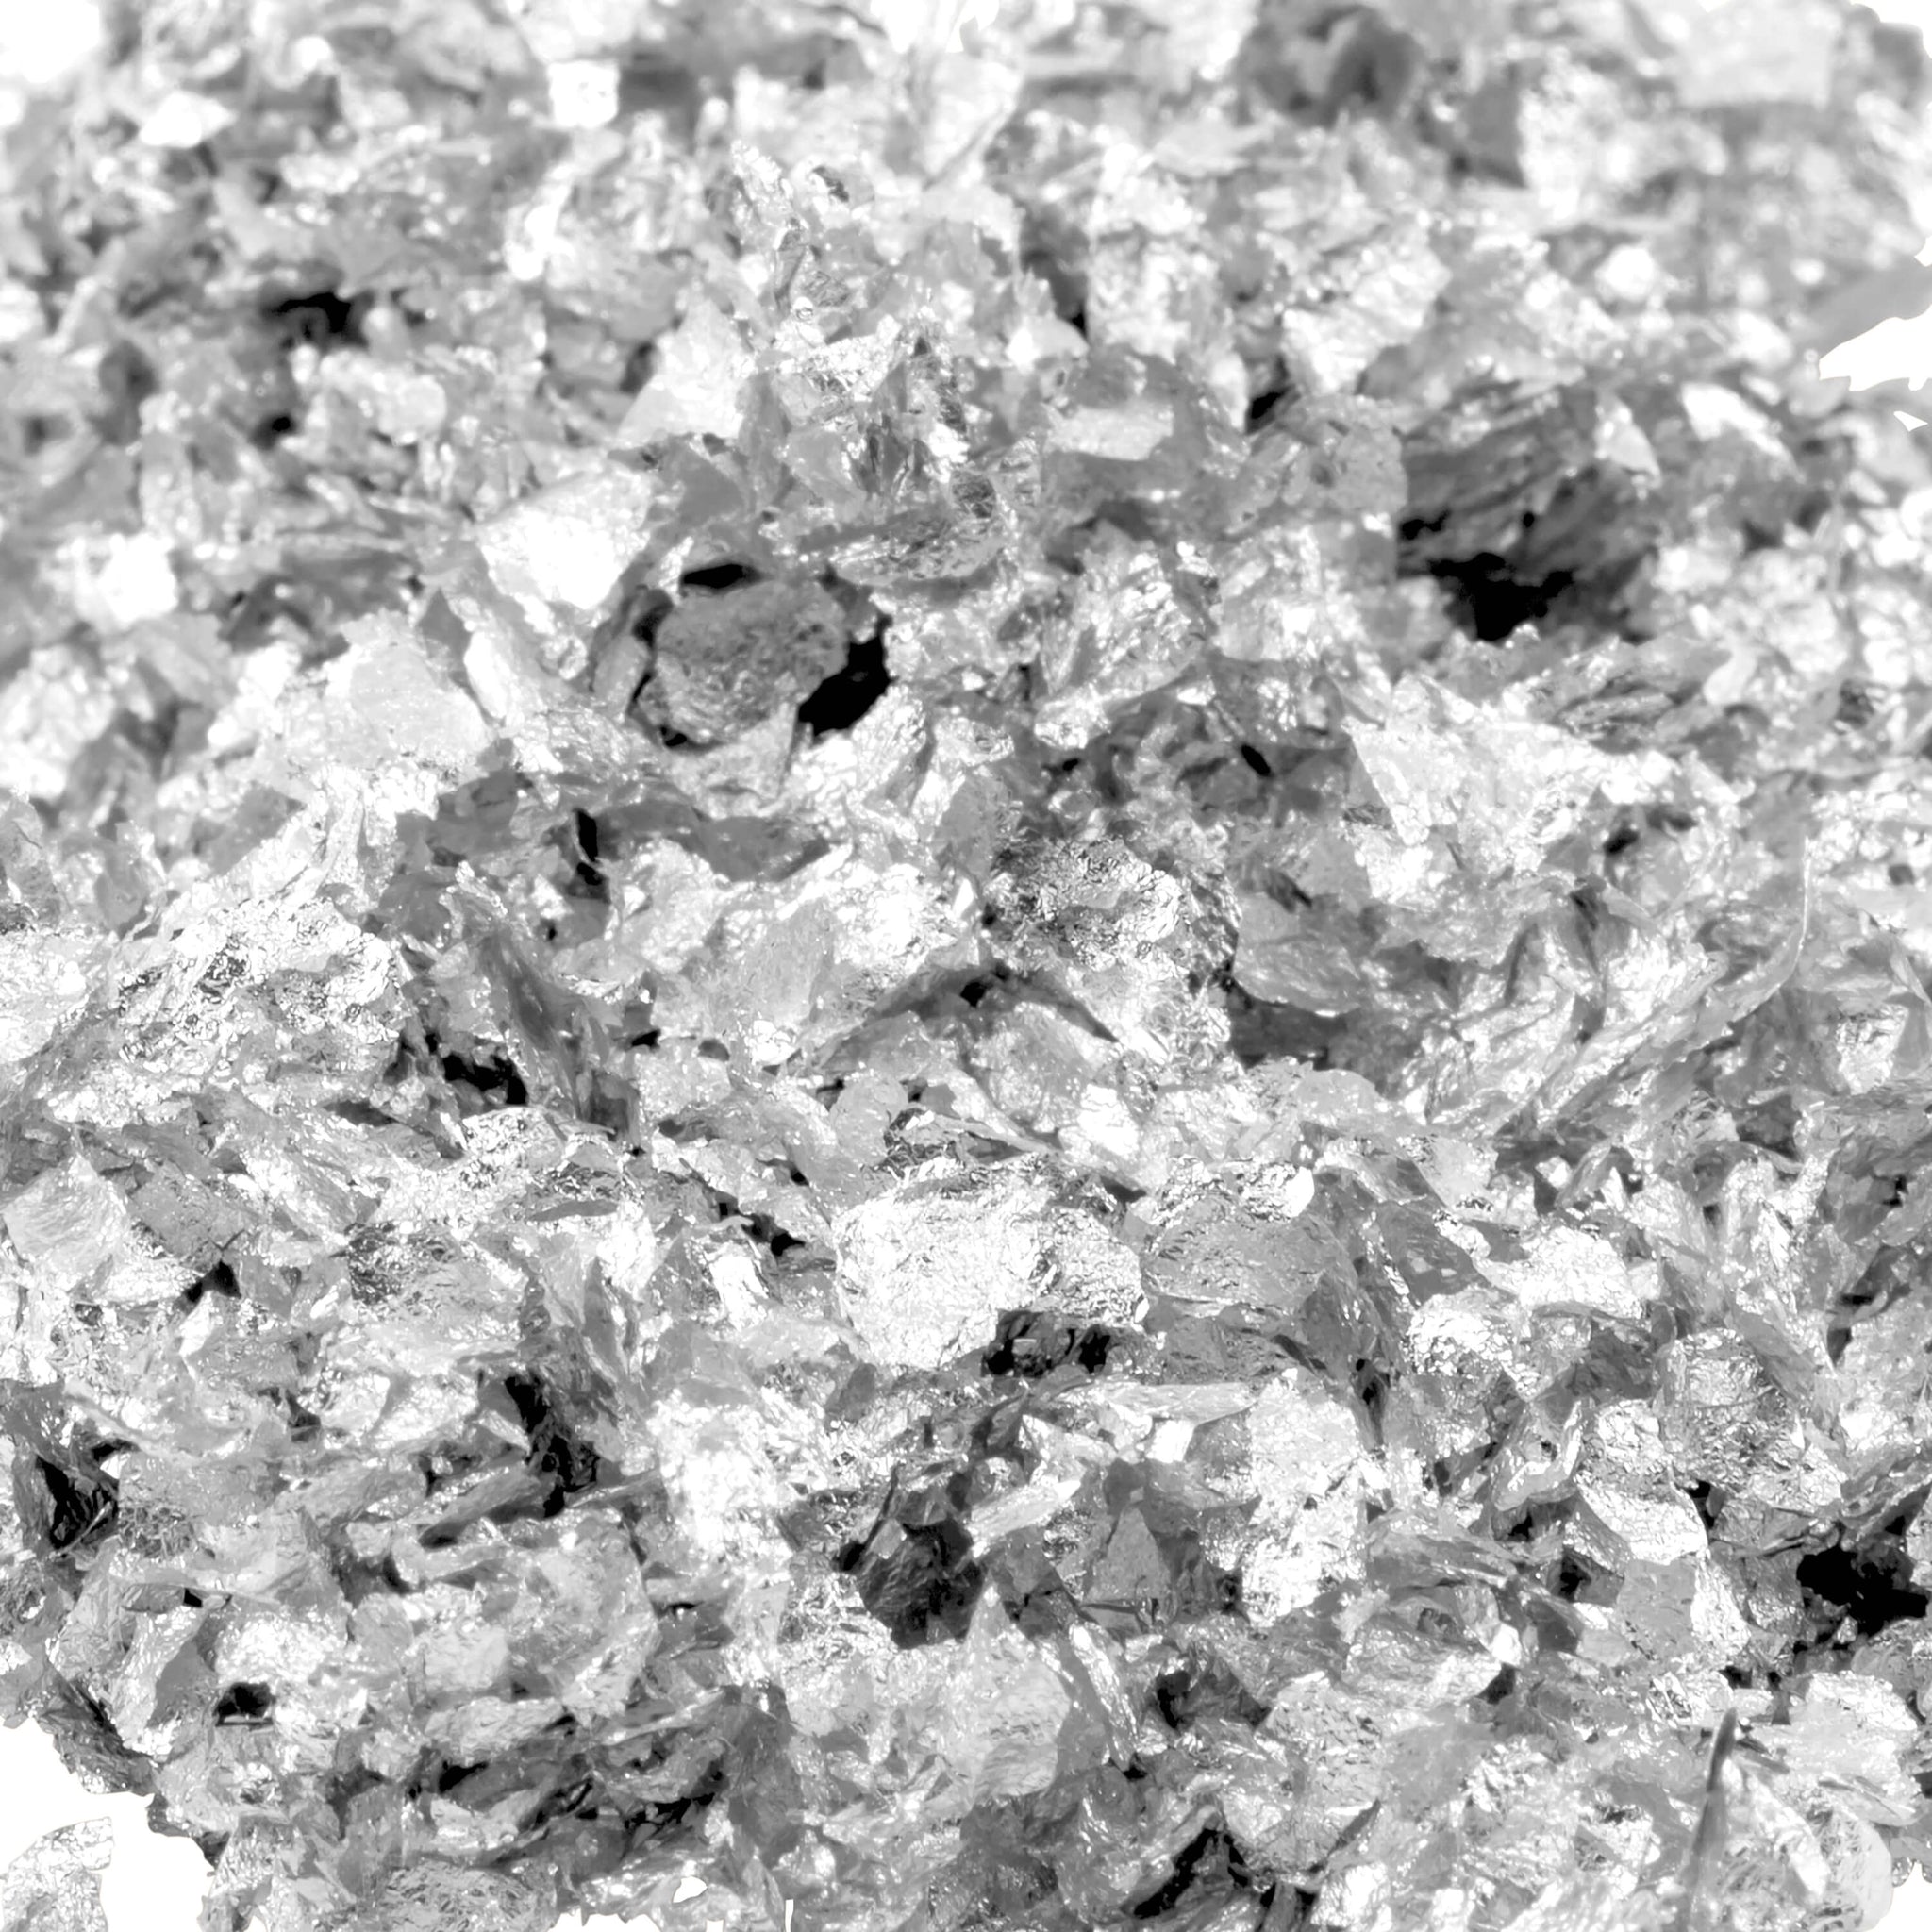 Cobakey Edible Silver Leaf - 50mg Silver Leaf for Cake Decoration (Cupcake,  Chocolate, Steak, Drink & Cooking), Edible Silver Flakes with Edible